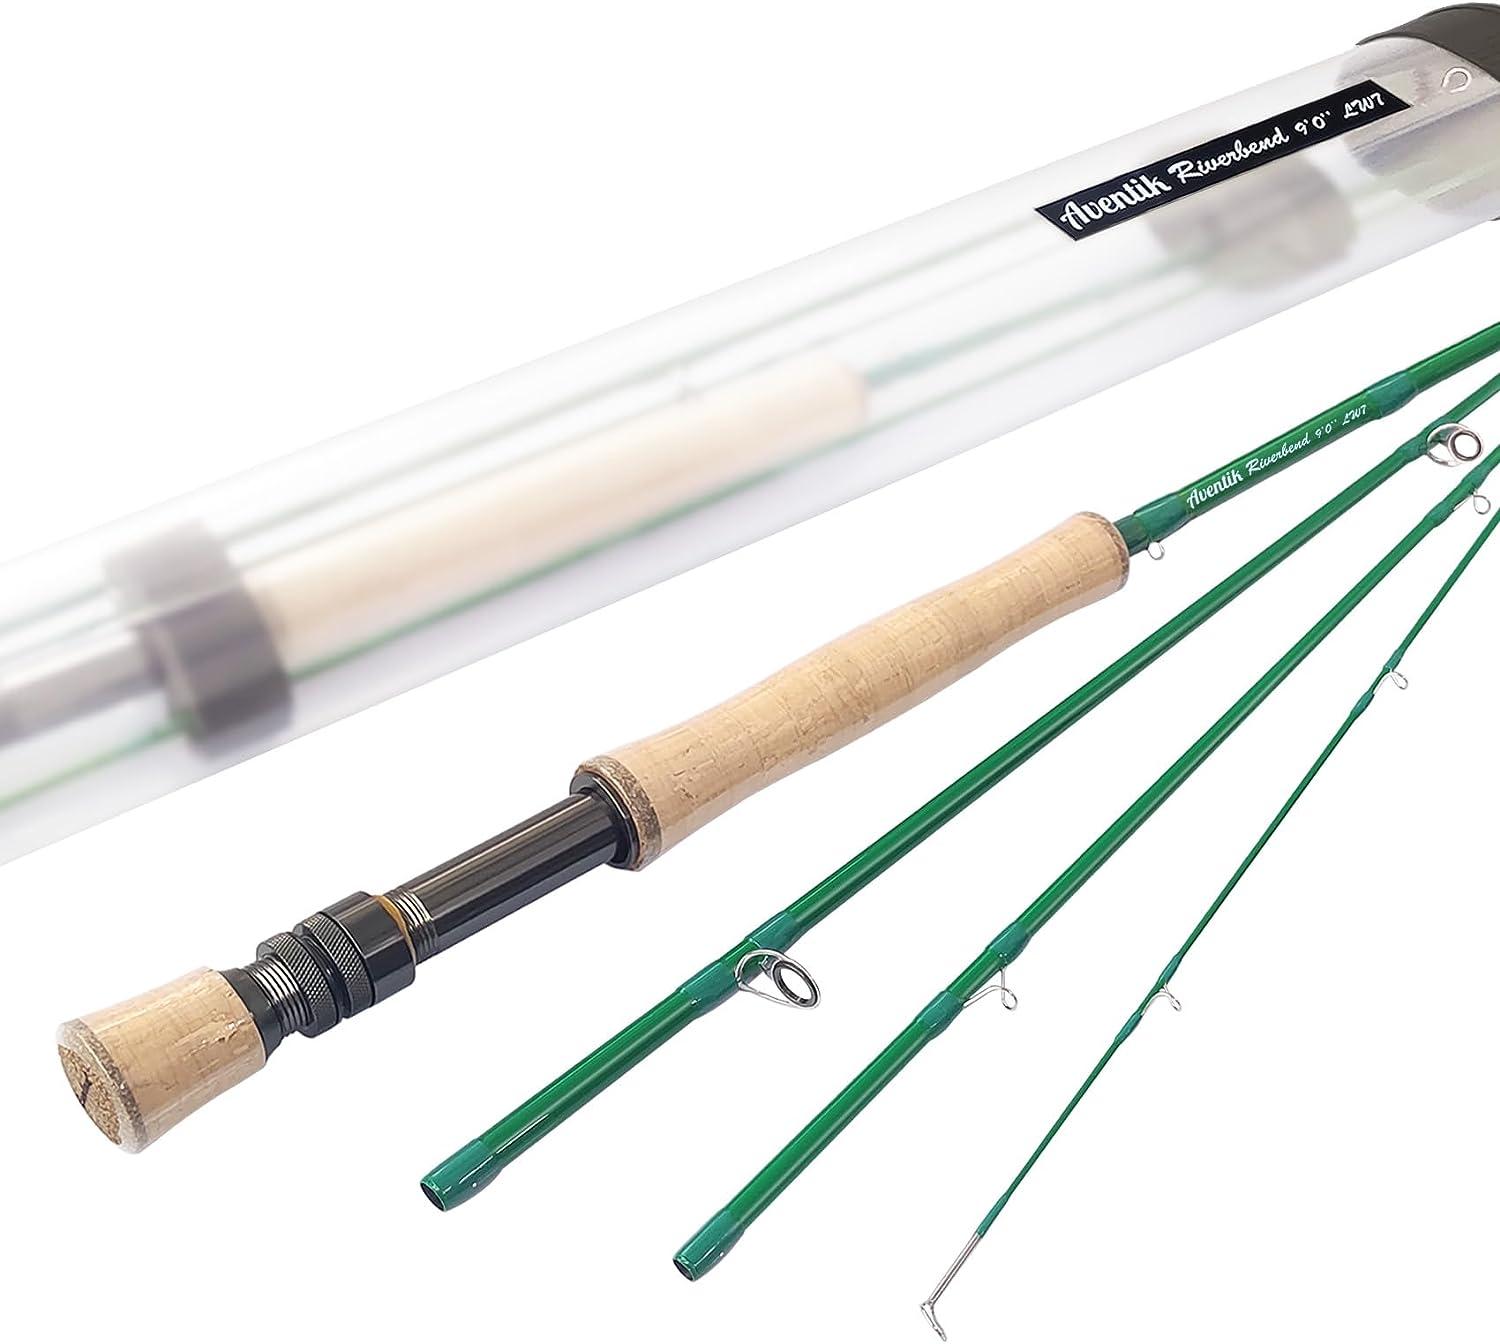 4 Pieces Travel Sea Fishing Rod Freshwater Saltwater 7 8 9 or 10ft